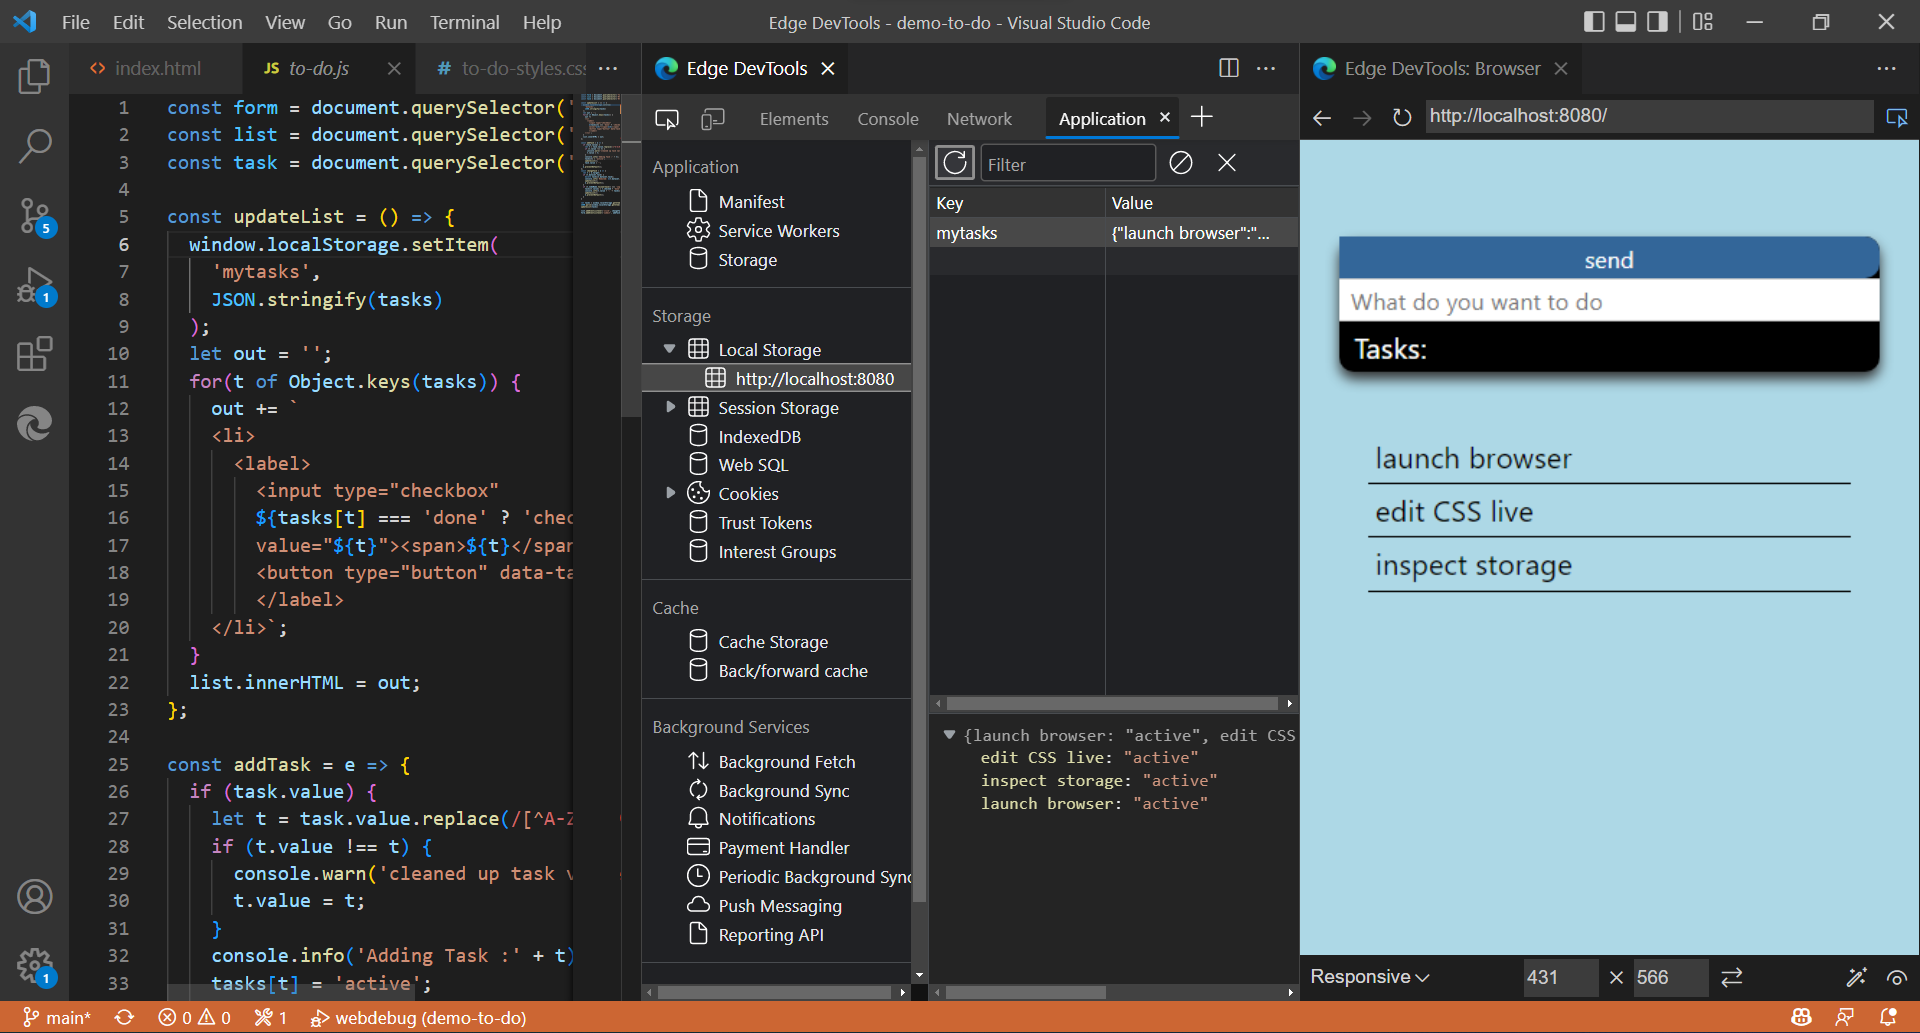 The Application tool in the 'Edge DevTools' tab within Visual Studio Code